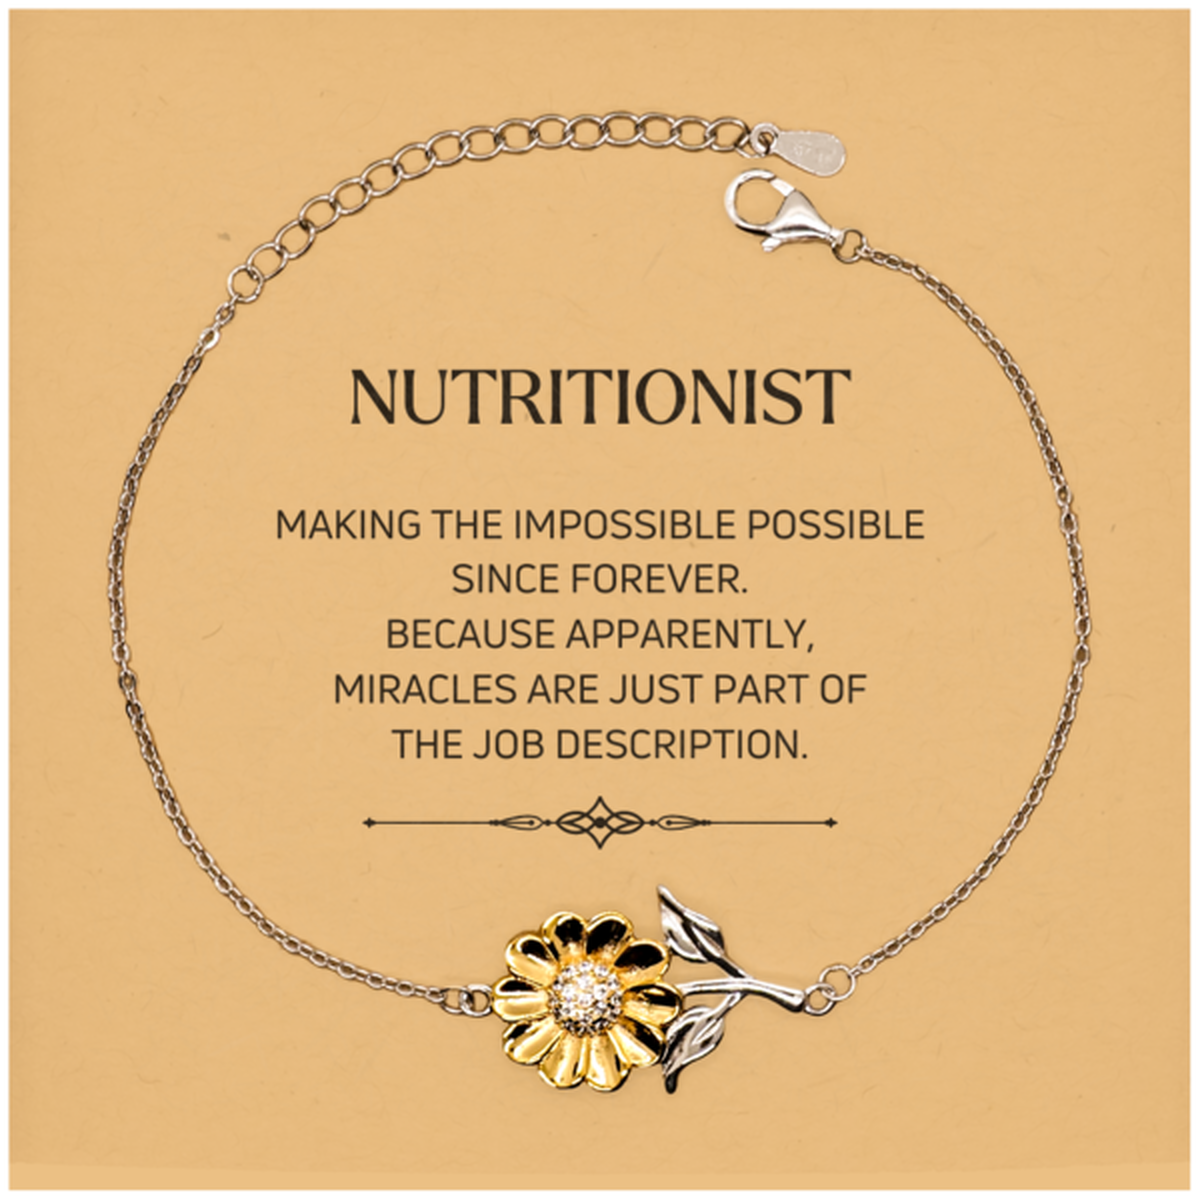 Funny Nutritionist Gifts, Miracles are just part of the job description, Inspirational Birthday Christmas Sunflower Bracelet For Nutritionist, Men, Women, Coworkers, Friends, Boss